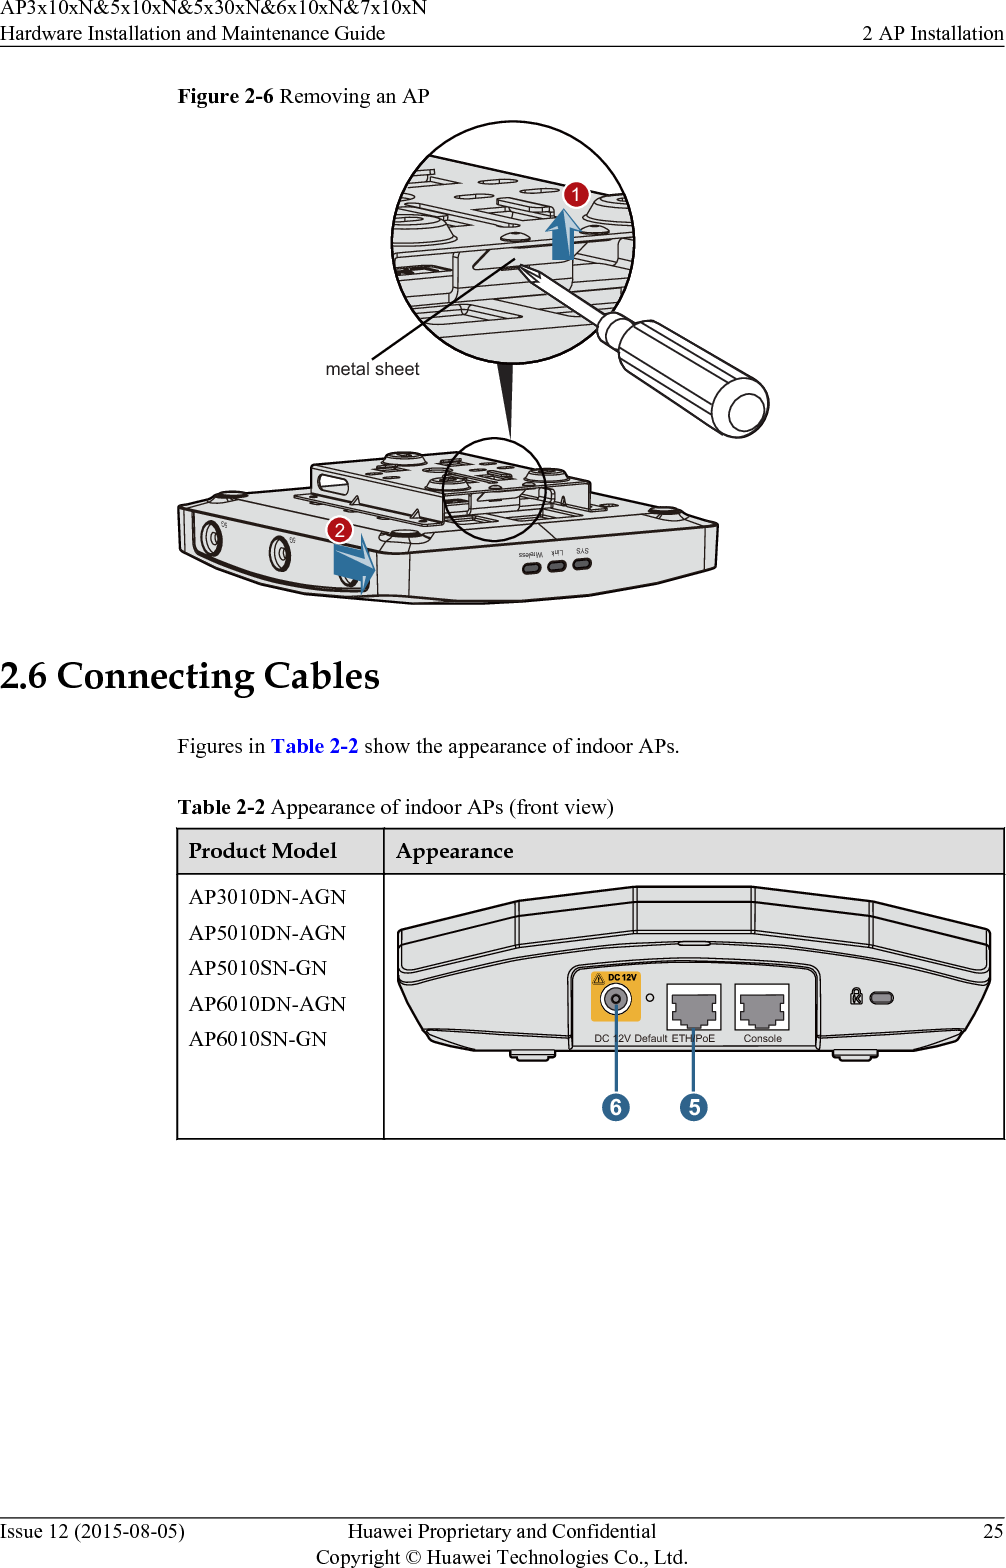 Figure 2-6 Removing an AP5G5G5GWirelessLinkSYSmetal sheet212.6 Connecting CablesFigures in Table 2-2 show the appearance of indoor APs.Table 2-2 Appearance of indoor APs (front view)Product Model AppearanceAP3010DN-AGNAP5010DN-AGNAP5010SN-GNAP6010DN-AGNAP6010SN-GN6 5ConsoleETH/PoEDefaultDC 12VAP3x10xN&amp;5x10xN&amp;5x30xN&amp;6x10xN&amp;7x10xNHardware Installation and Maintenance Guide 2 AP InstallationIssue 12 (2015-08-05) Huawei Proprietary and ConfidentialCopyright © Huawei Technologies Co., Ltd.25